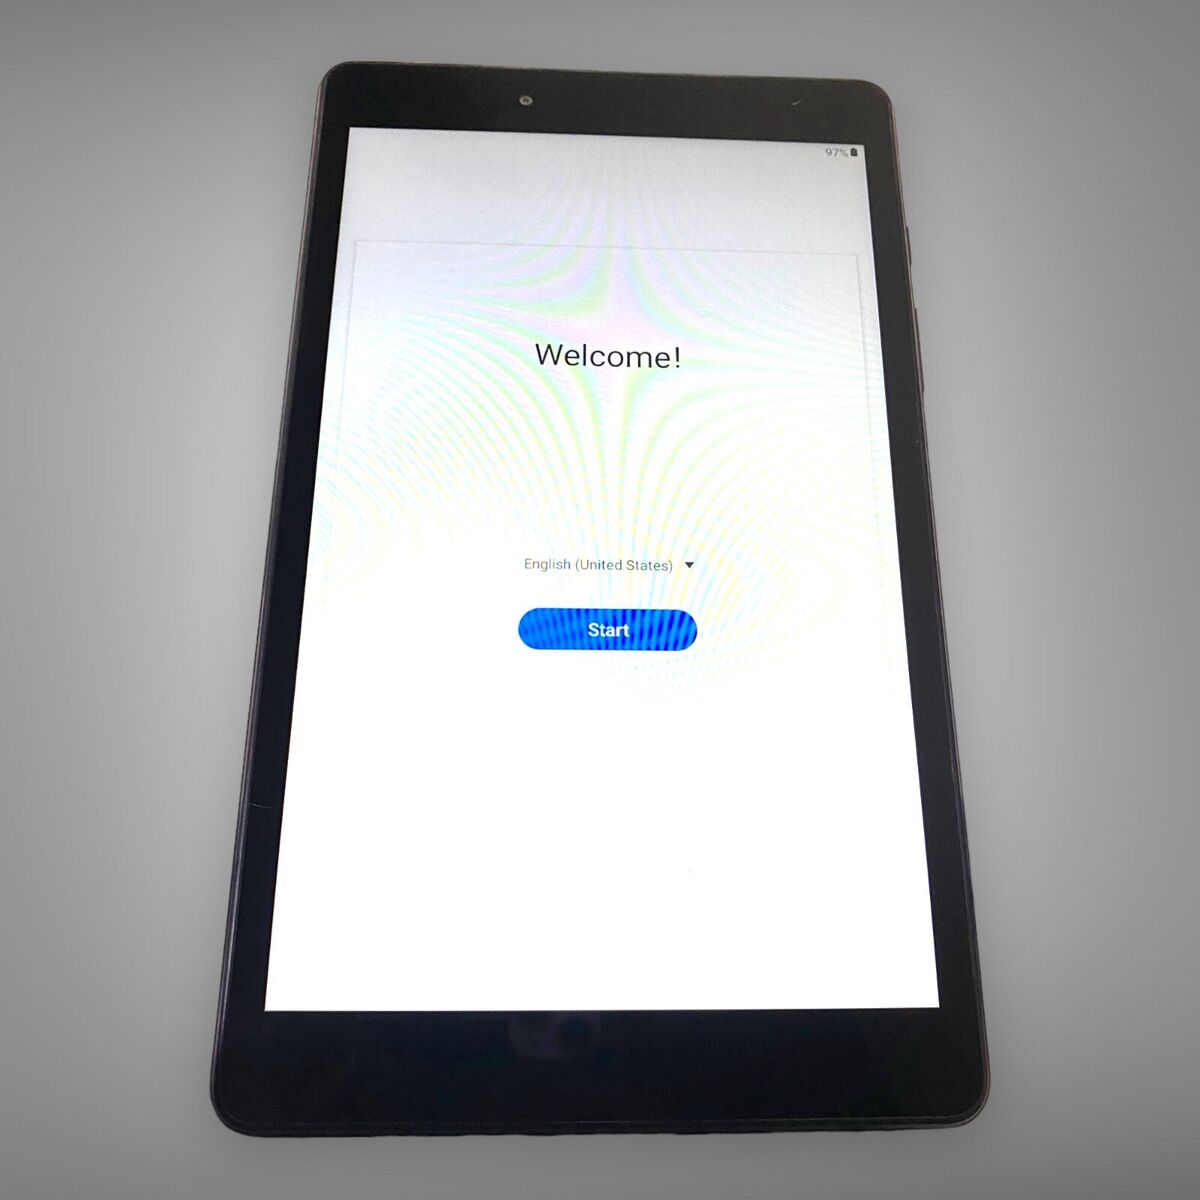 How To Hard Reset Samsung Tablet Without Password